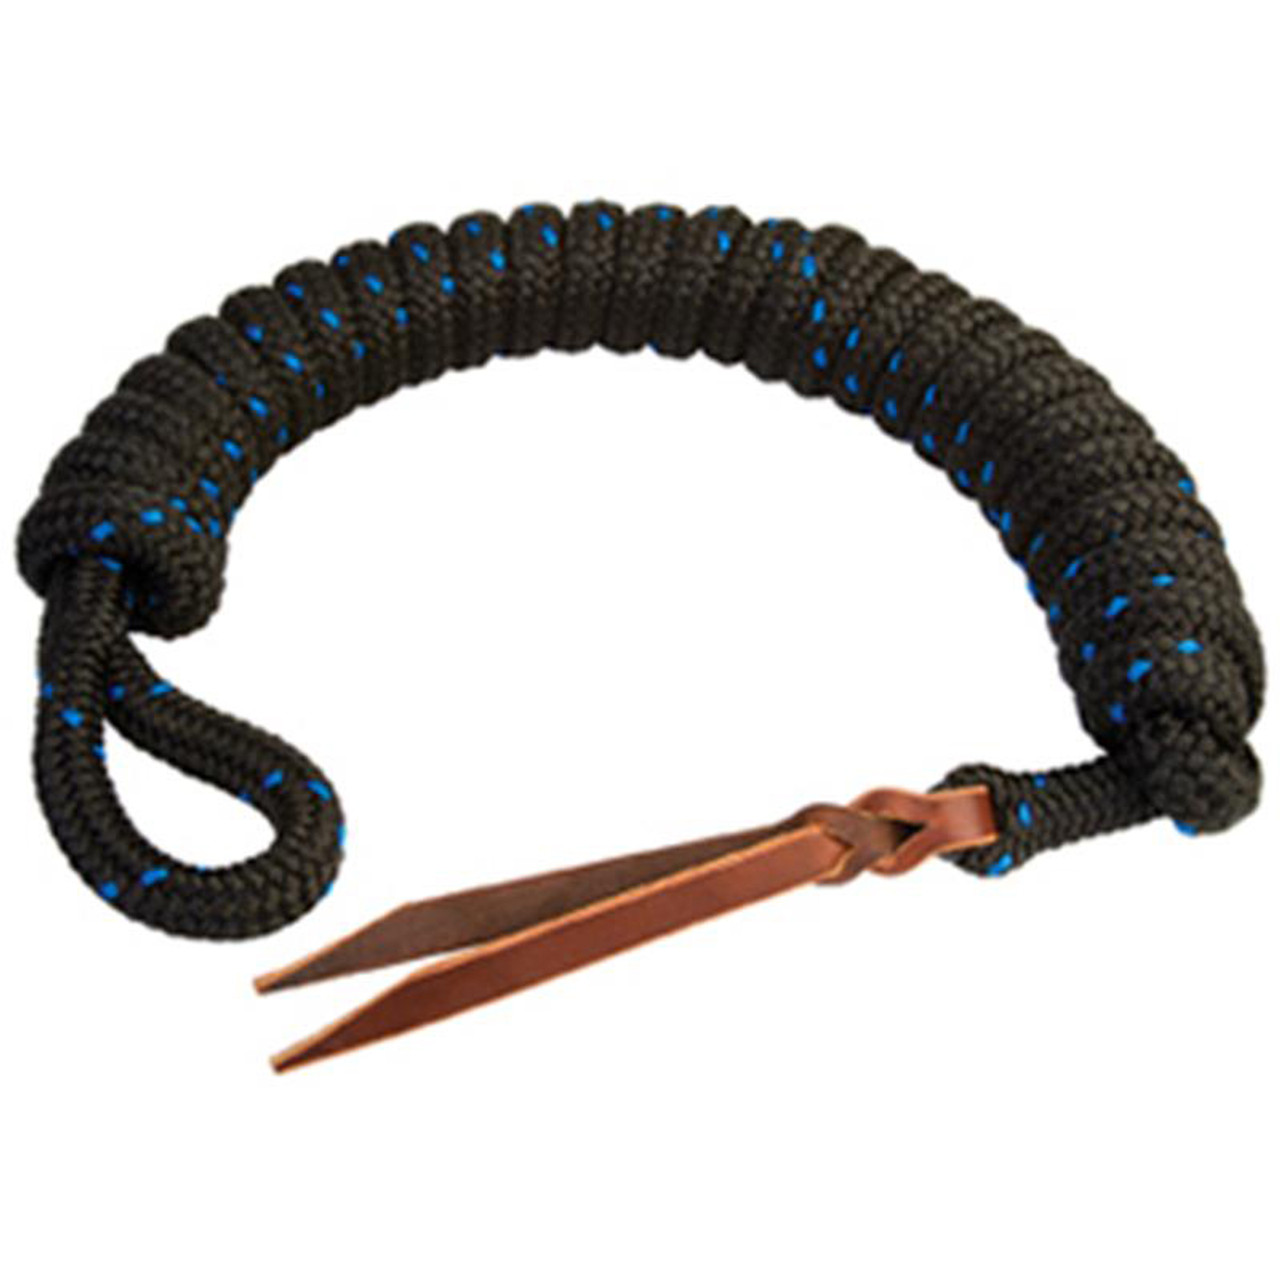 Weaver Leather Stacy Westfall Training Rope, Black Blue, 3 4 inch